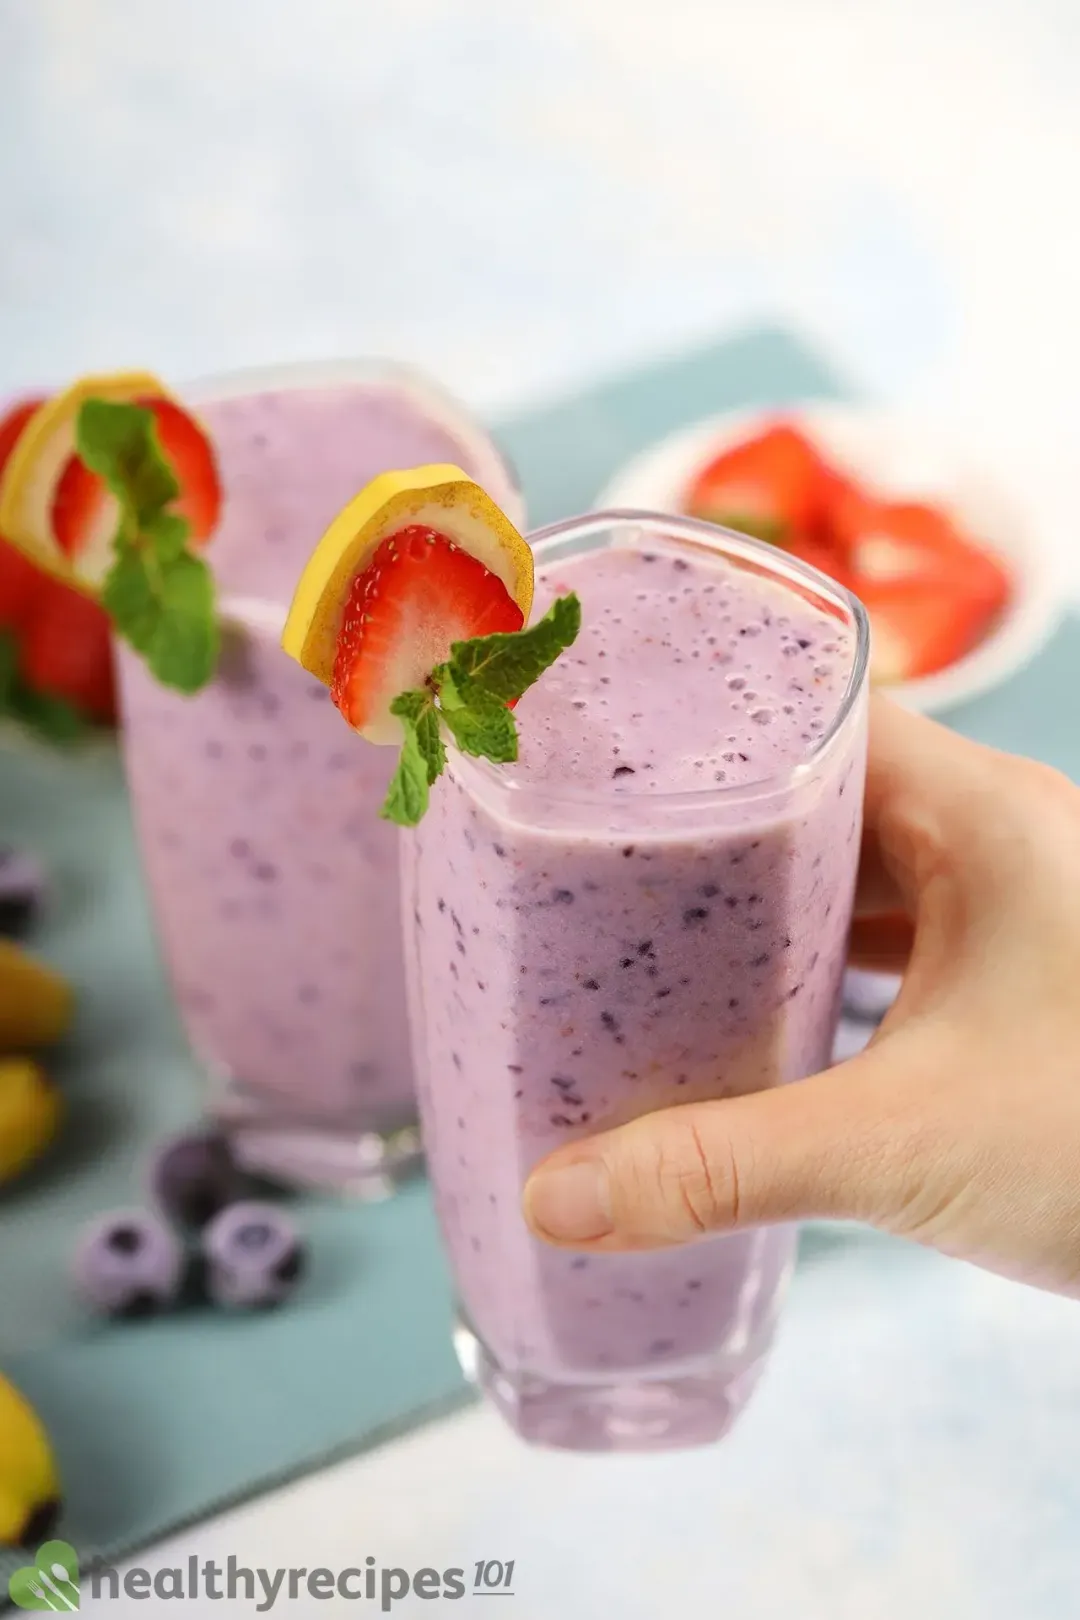 Is This Berry Banana Smoothie Healthy